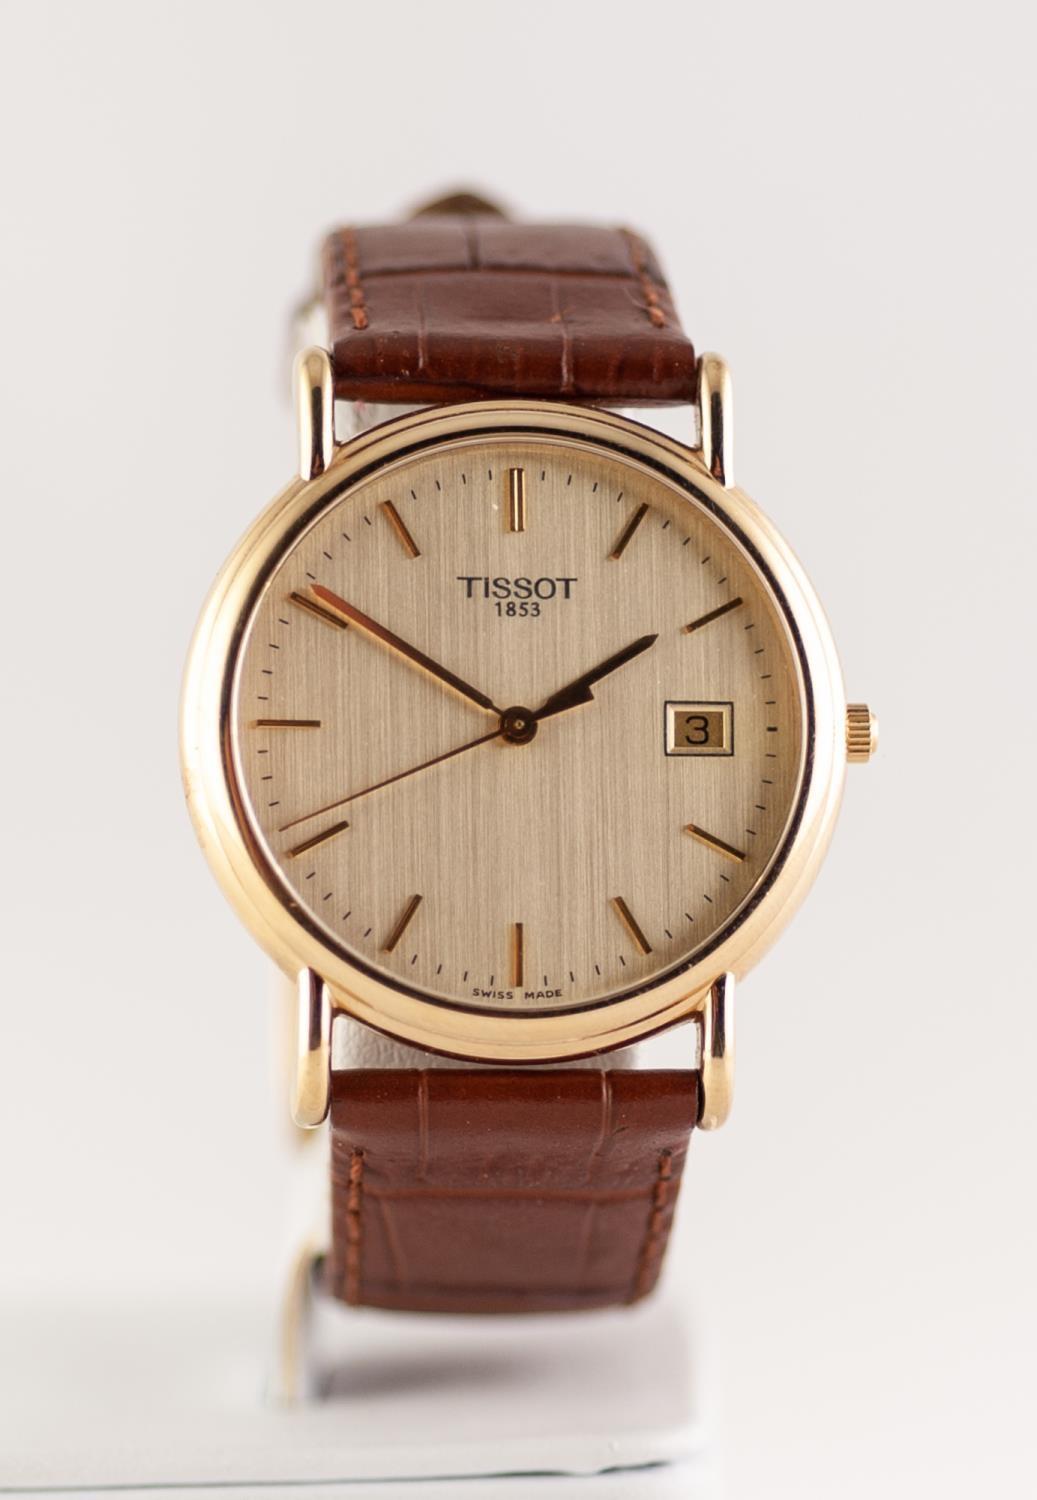 GENTS TISSOT "1853" 18ct GOLD WRIST WATCH with probably quartz movement , the gilt circular dial - Image 2 of 3